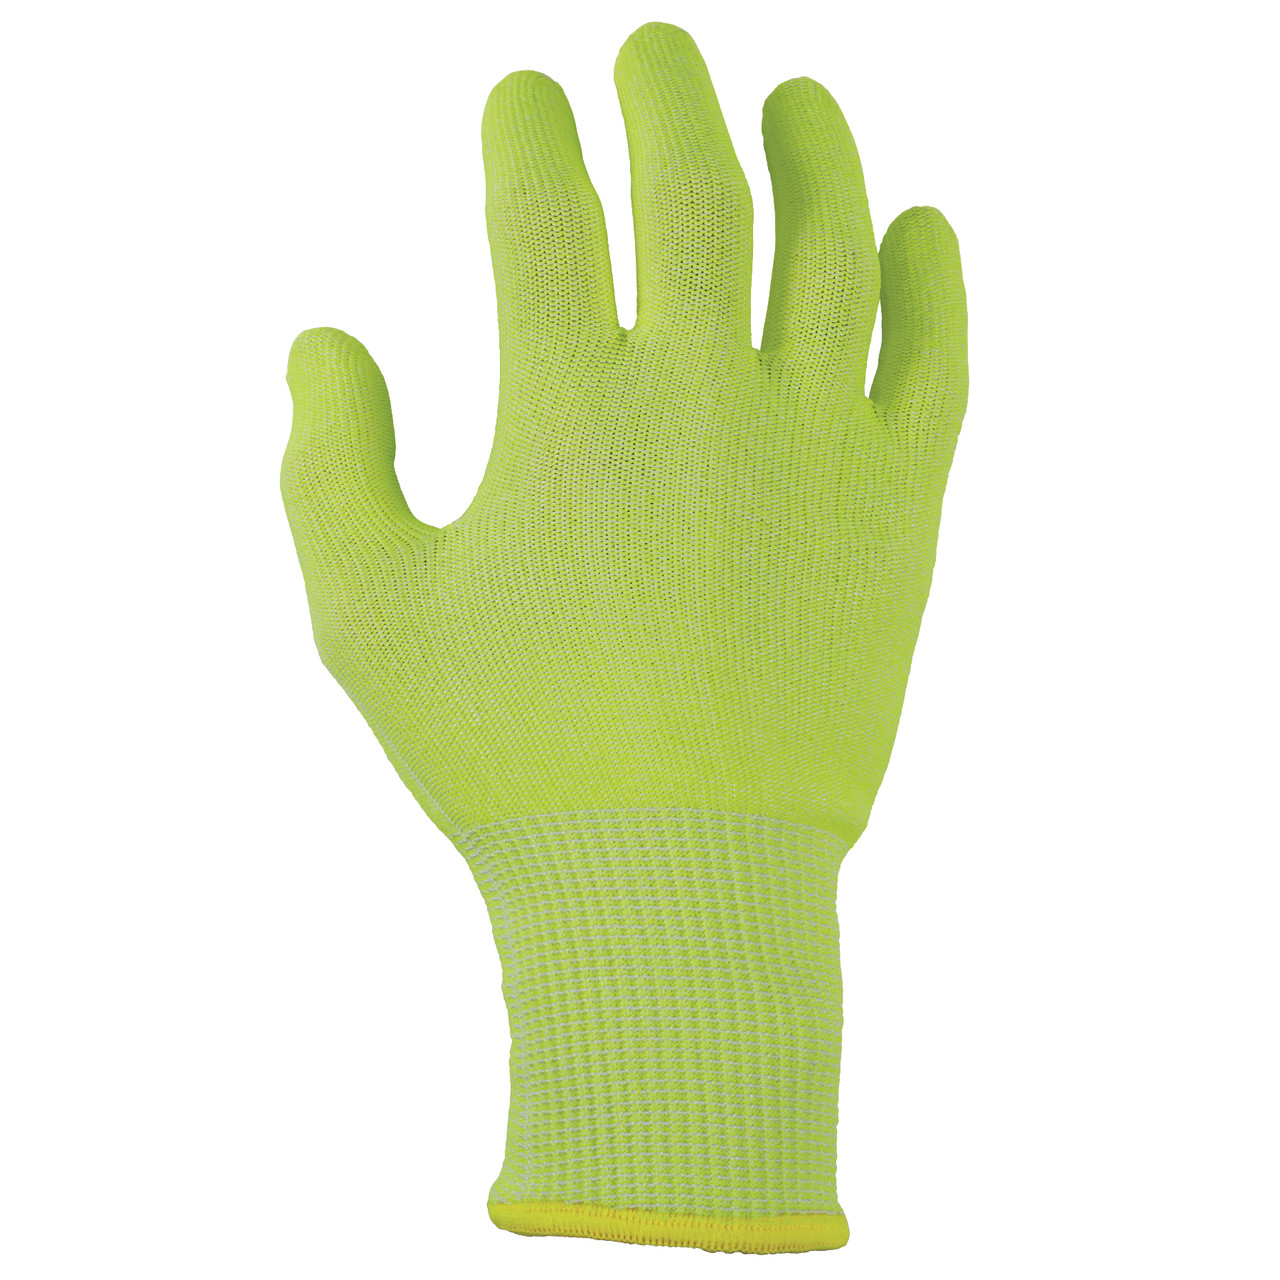 https://cdn11.bigcommerce.com/s-8715e/images/stencil/1280x1280/products/362864/684396/18022-7040-case-cut-resistant-food-grade-gloves-dorsal_0__68016.1702331798.jpg?c=2?imbypass=on